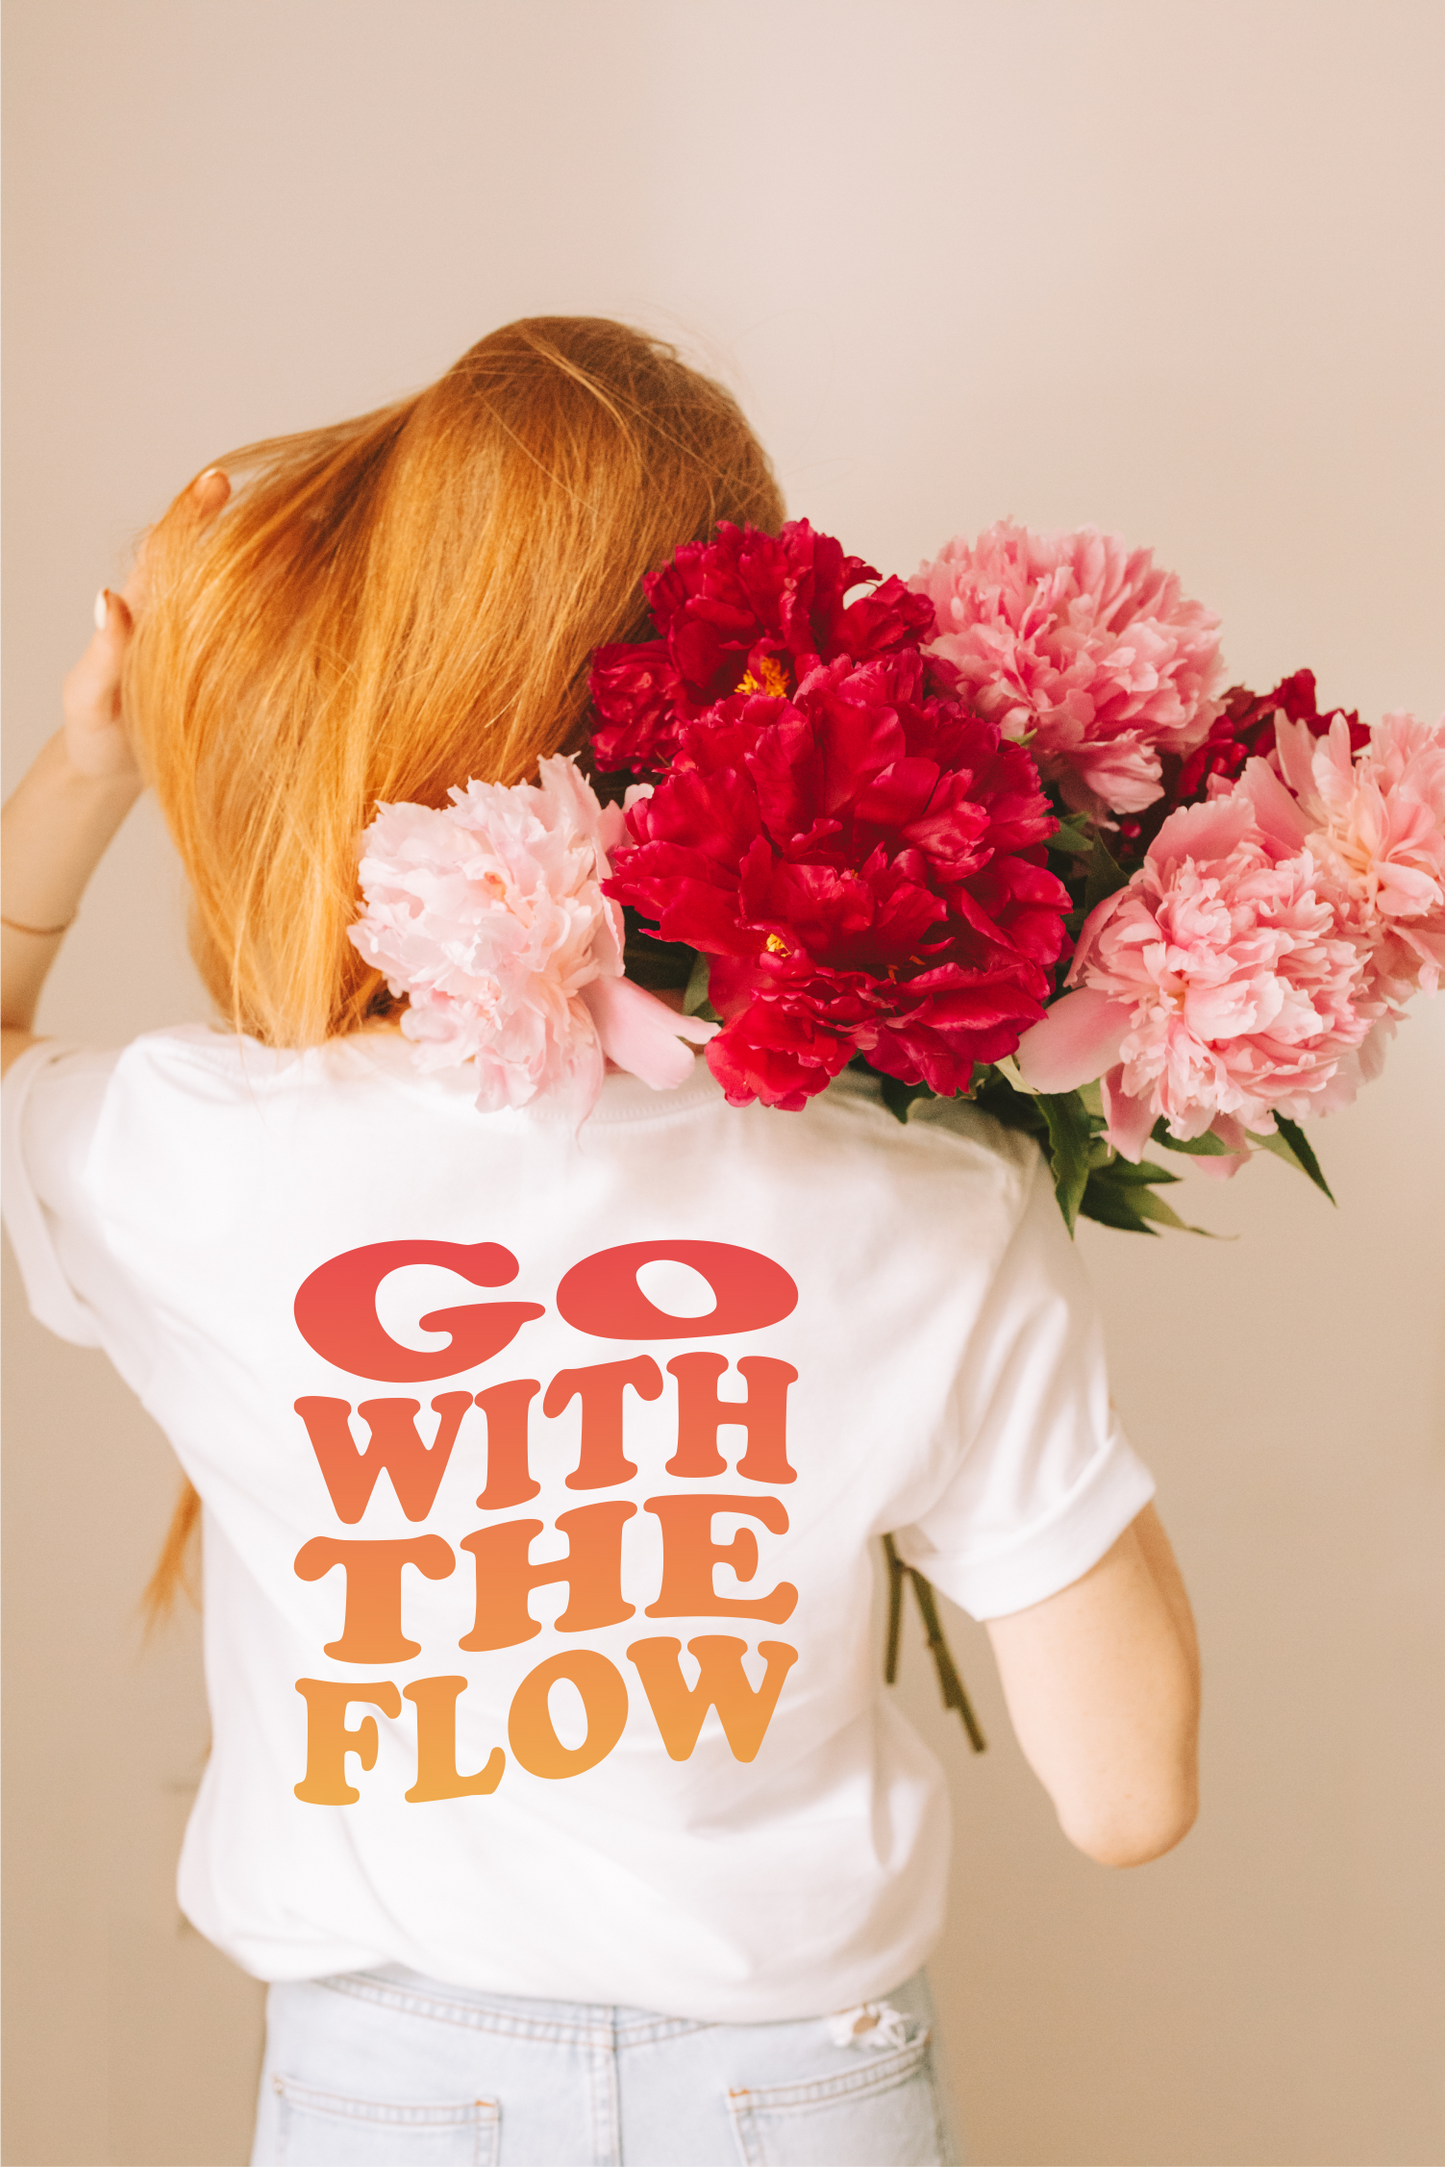 Go with the Flow Tee Shirt